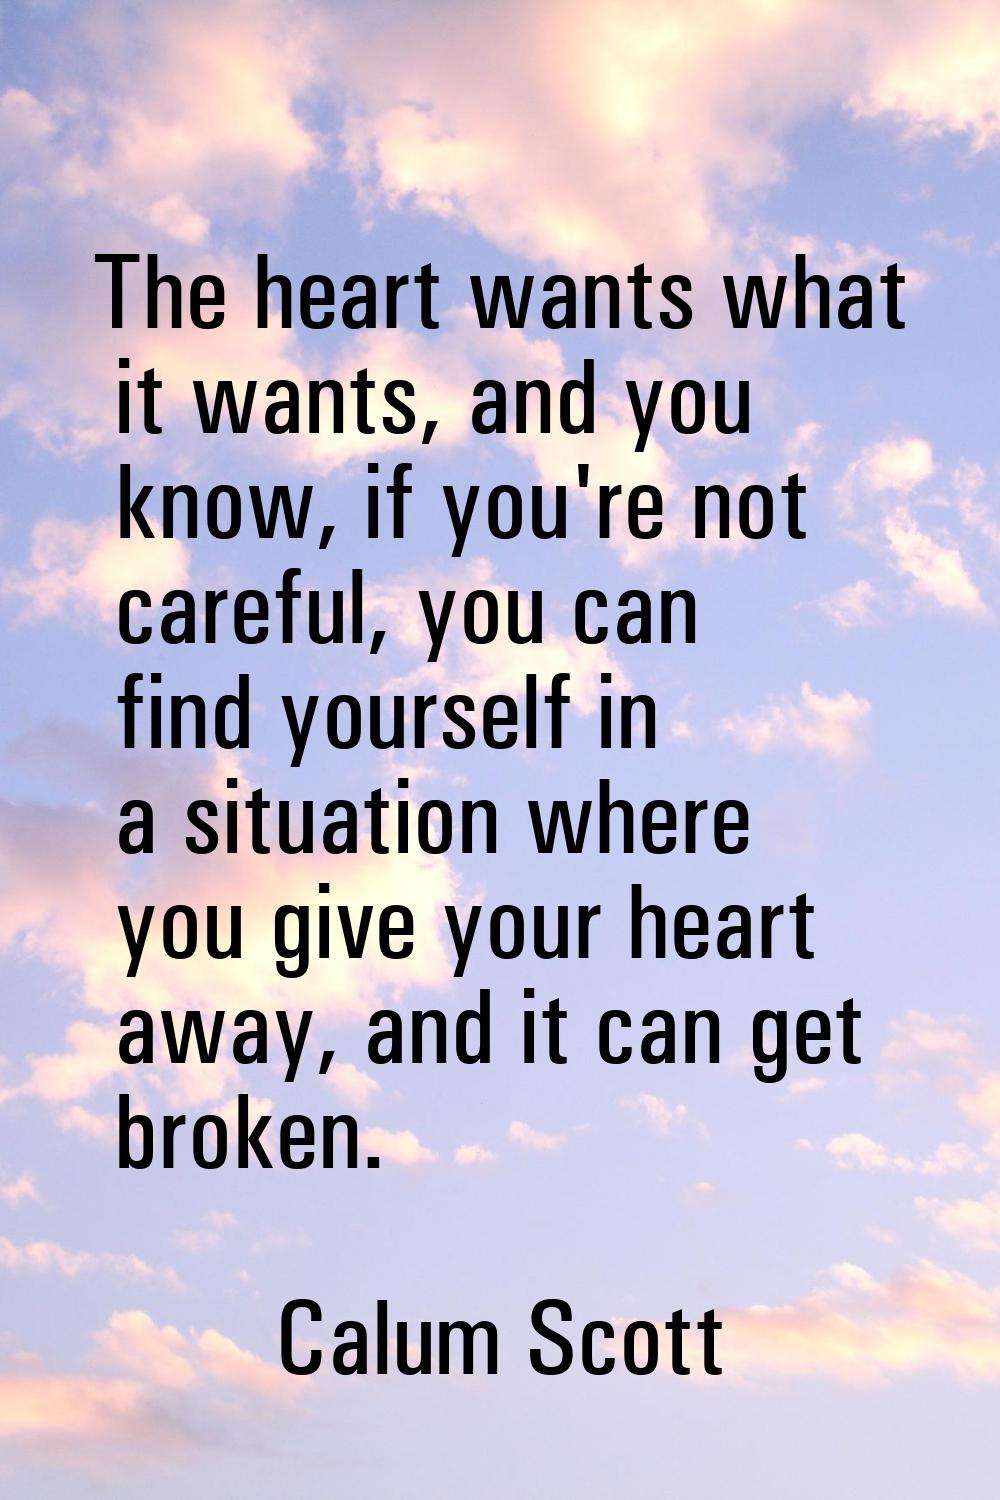 The heart wants what it wants, and you know, if you're not careful, you can find yourself in a situ